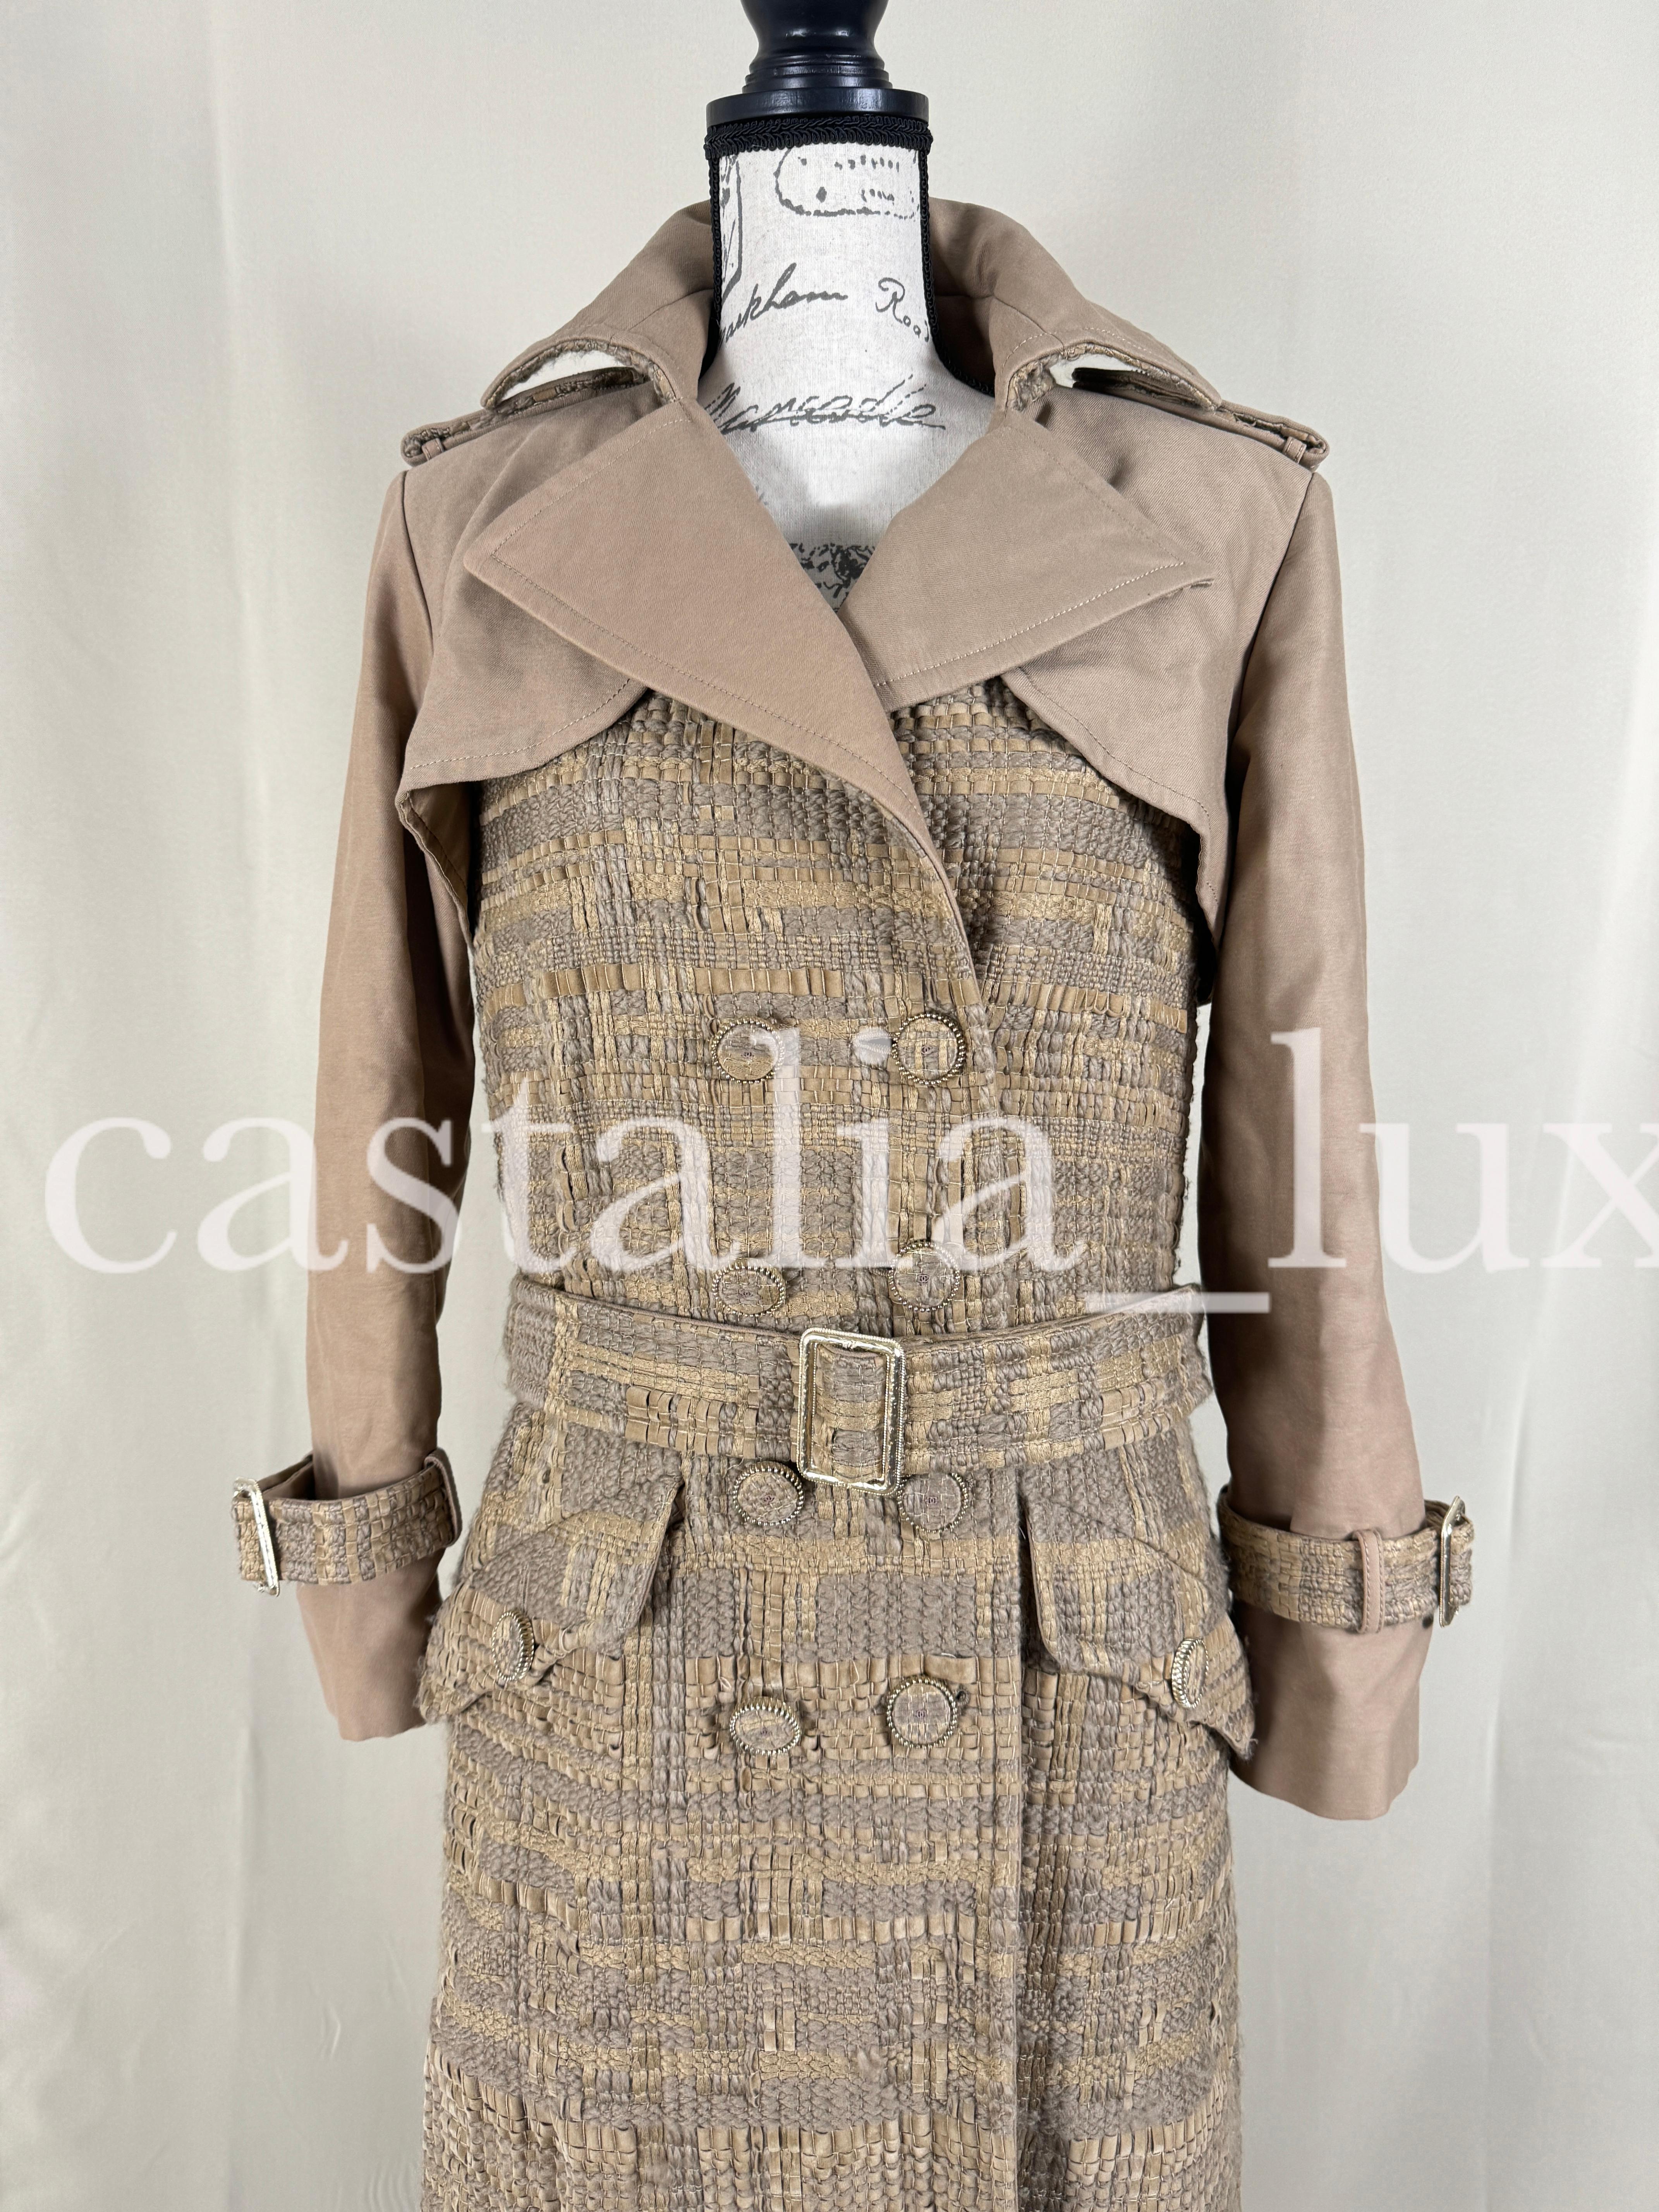 Chanel Iconic Billboards Ribbon Tweed Trench Coat For Sale 2